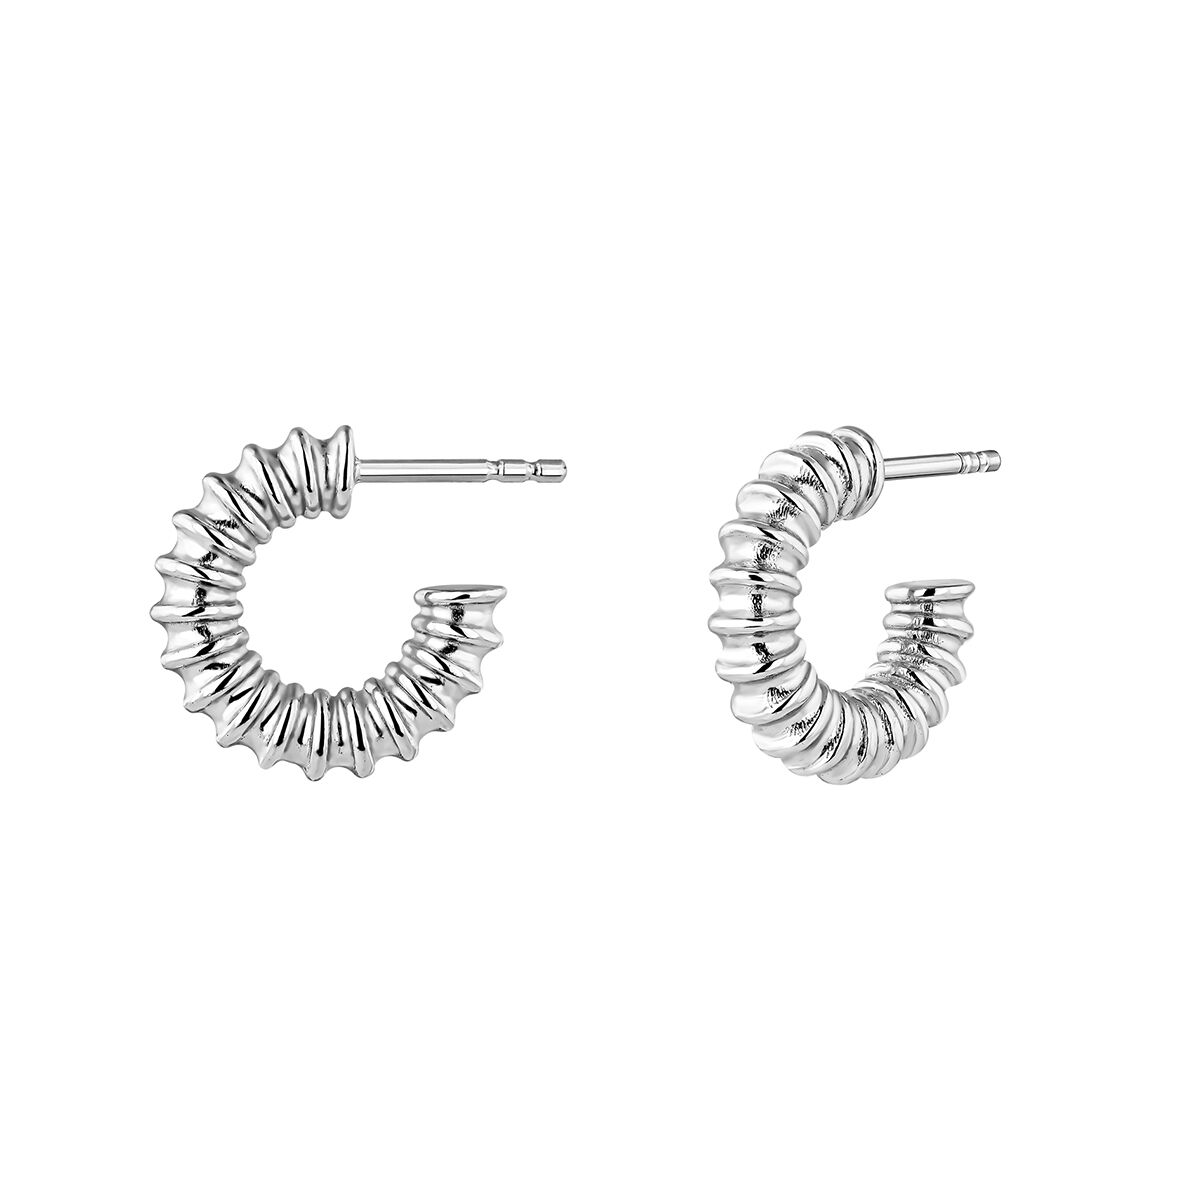 Small silver hoop earrings with texture, J05146-01, hi-res